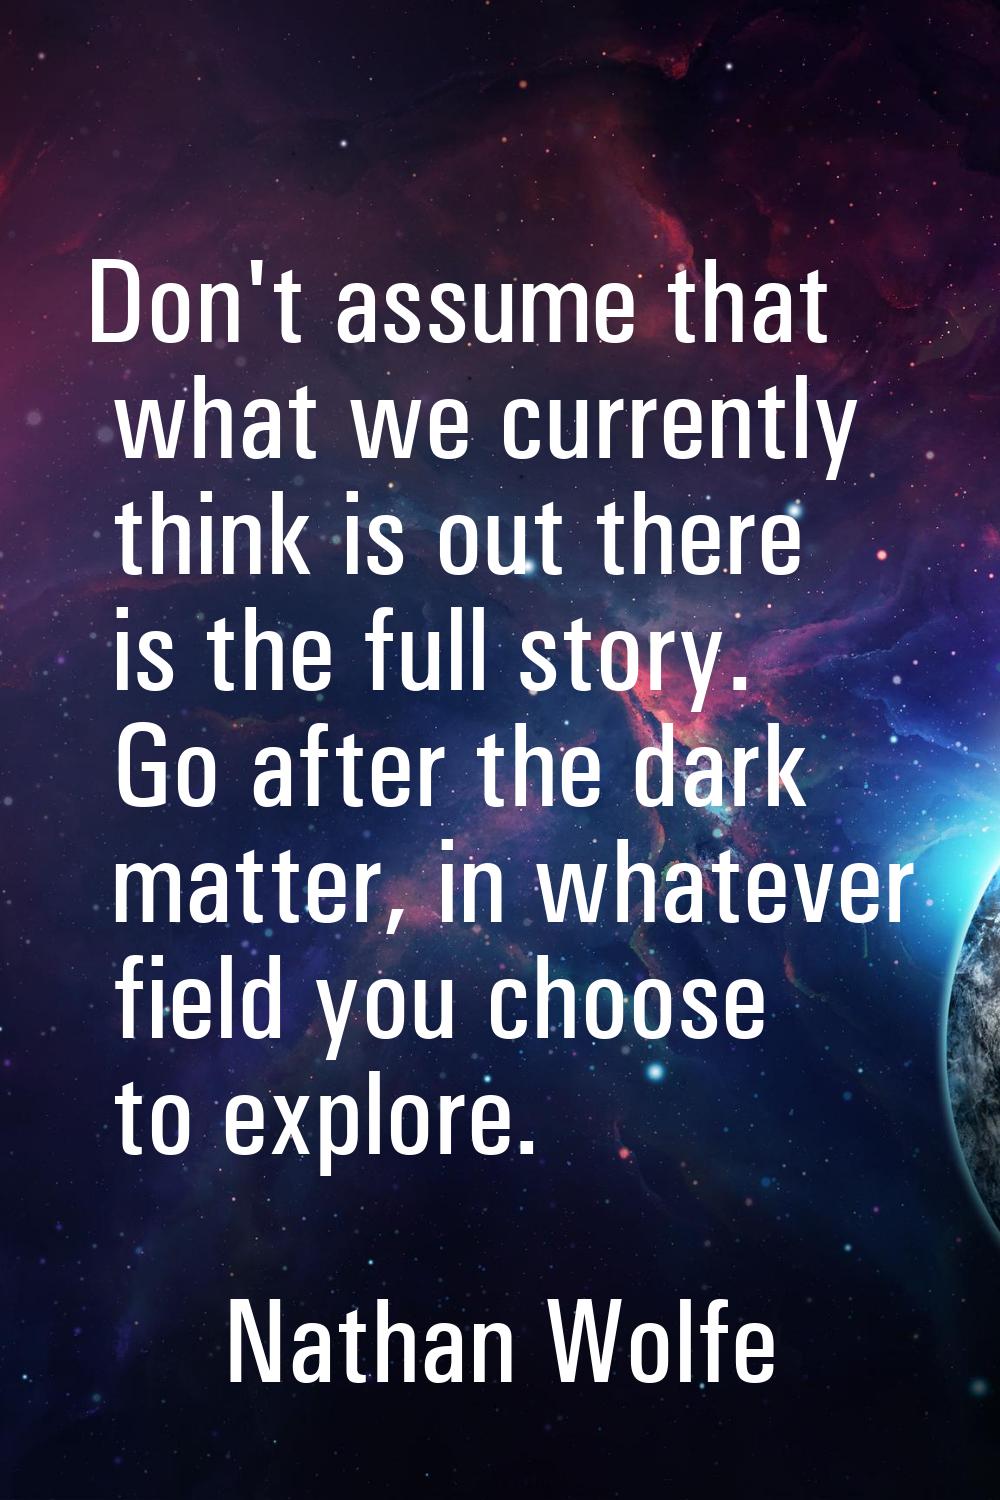 Don't assume that what we currently think is out there is the full story. Go after the dark matter,